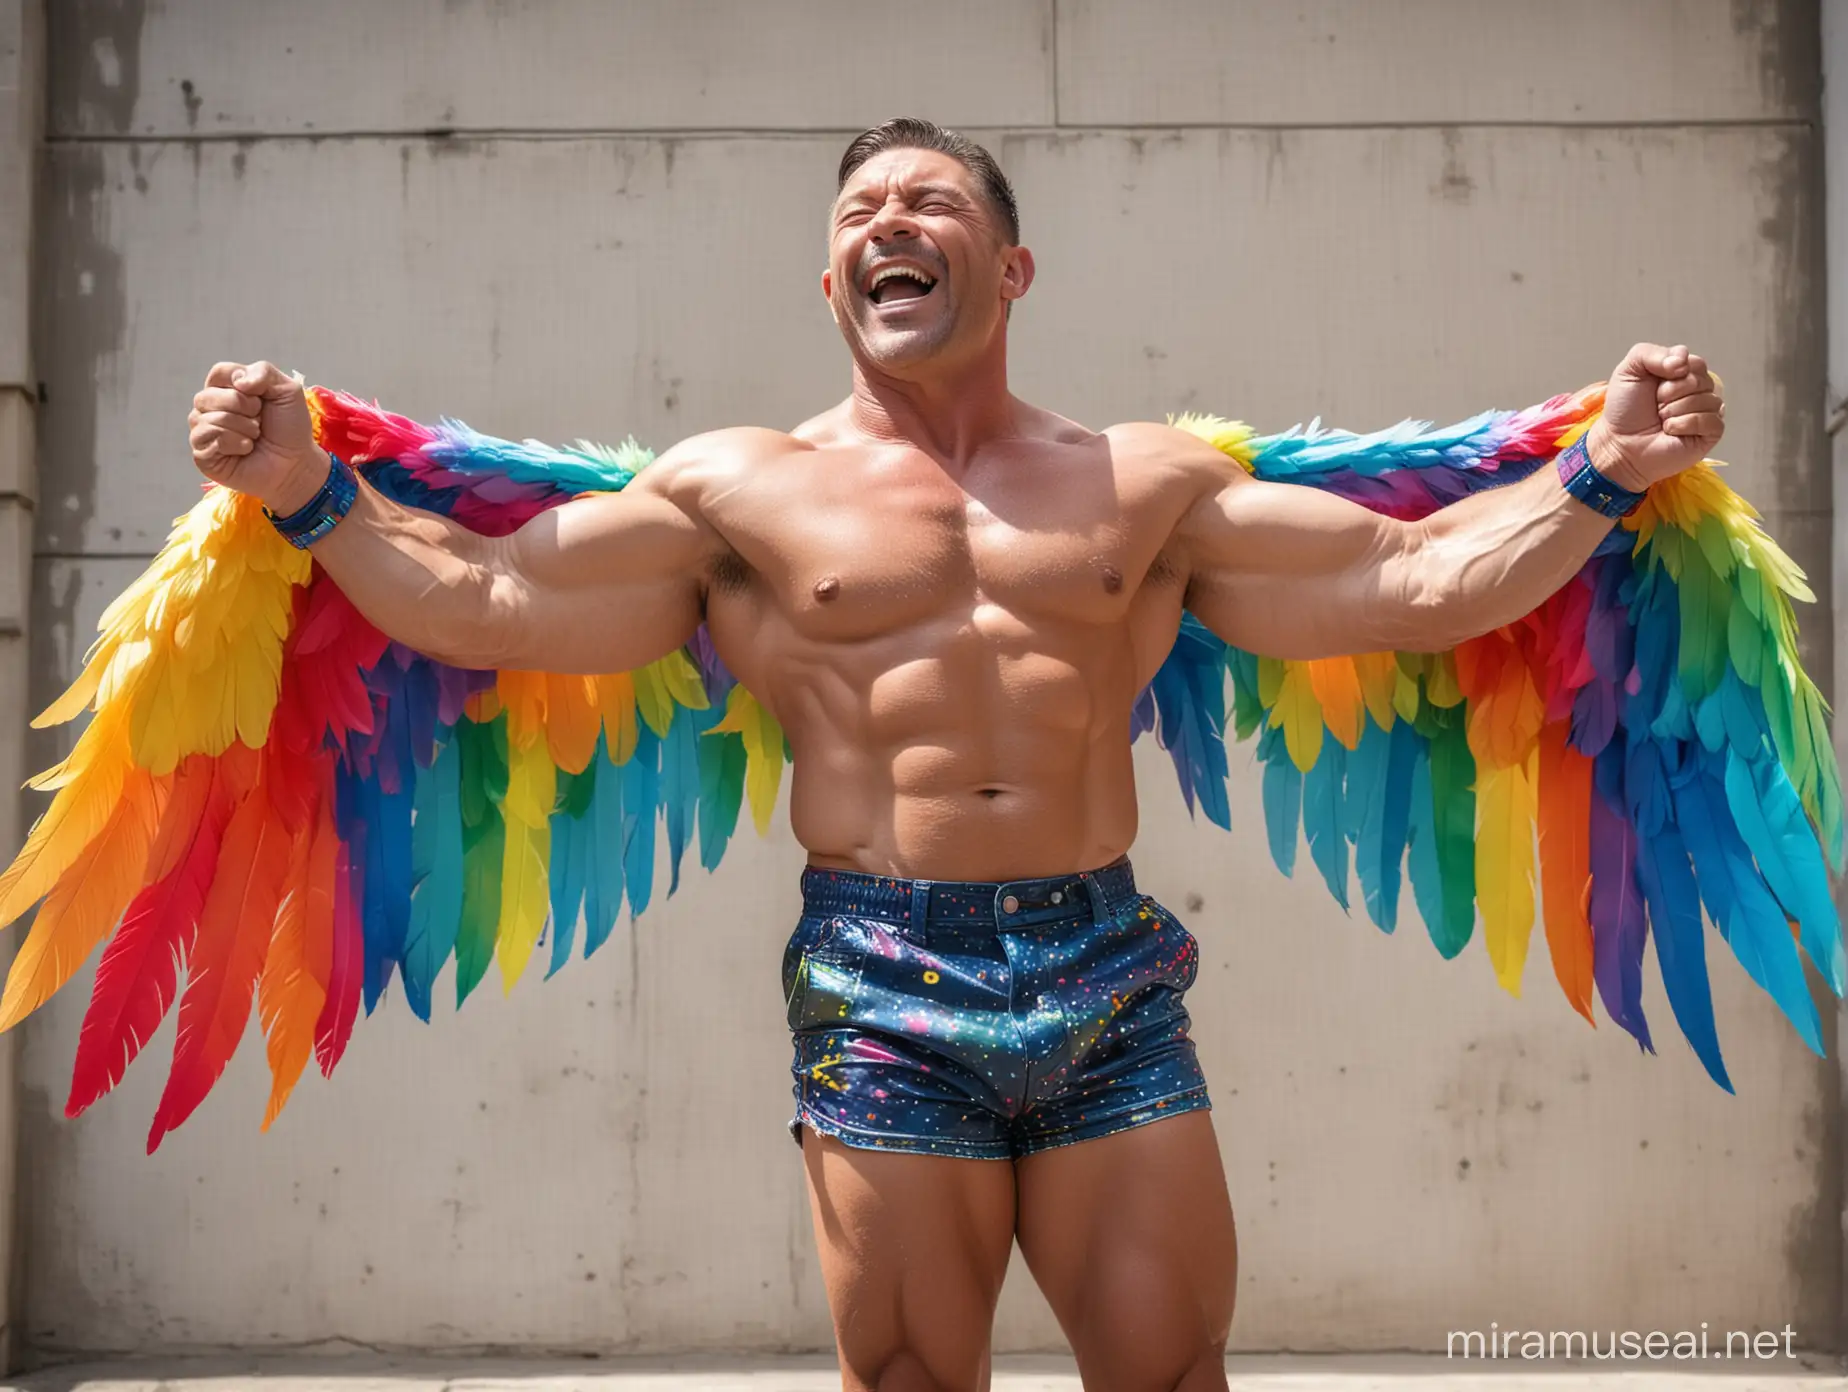 Happy Topless 40s Ultra Beefy IFBB Bodybuilder Man wearing Multi-Highlighter Bright Rainbow Coloured See Through Eagle Wings shoulder Jacket short shorts and Flexing Big Strong Arm with Doraemon